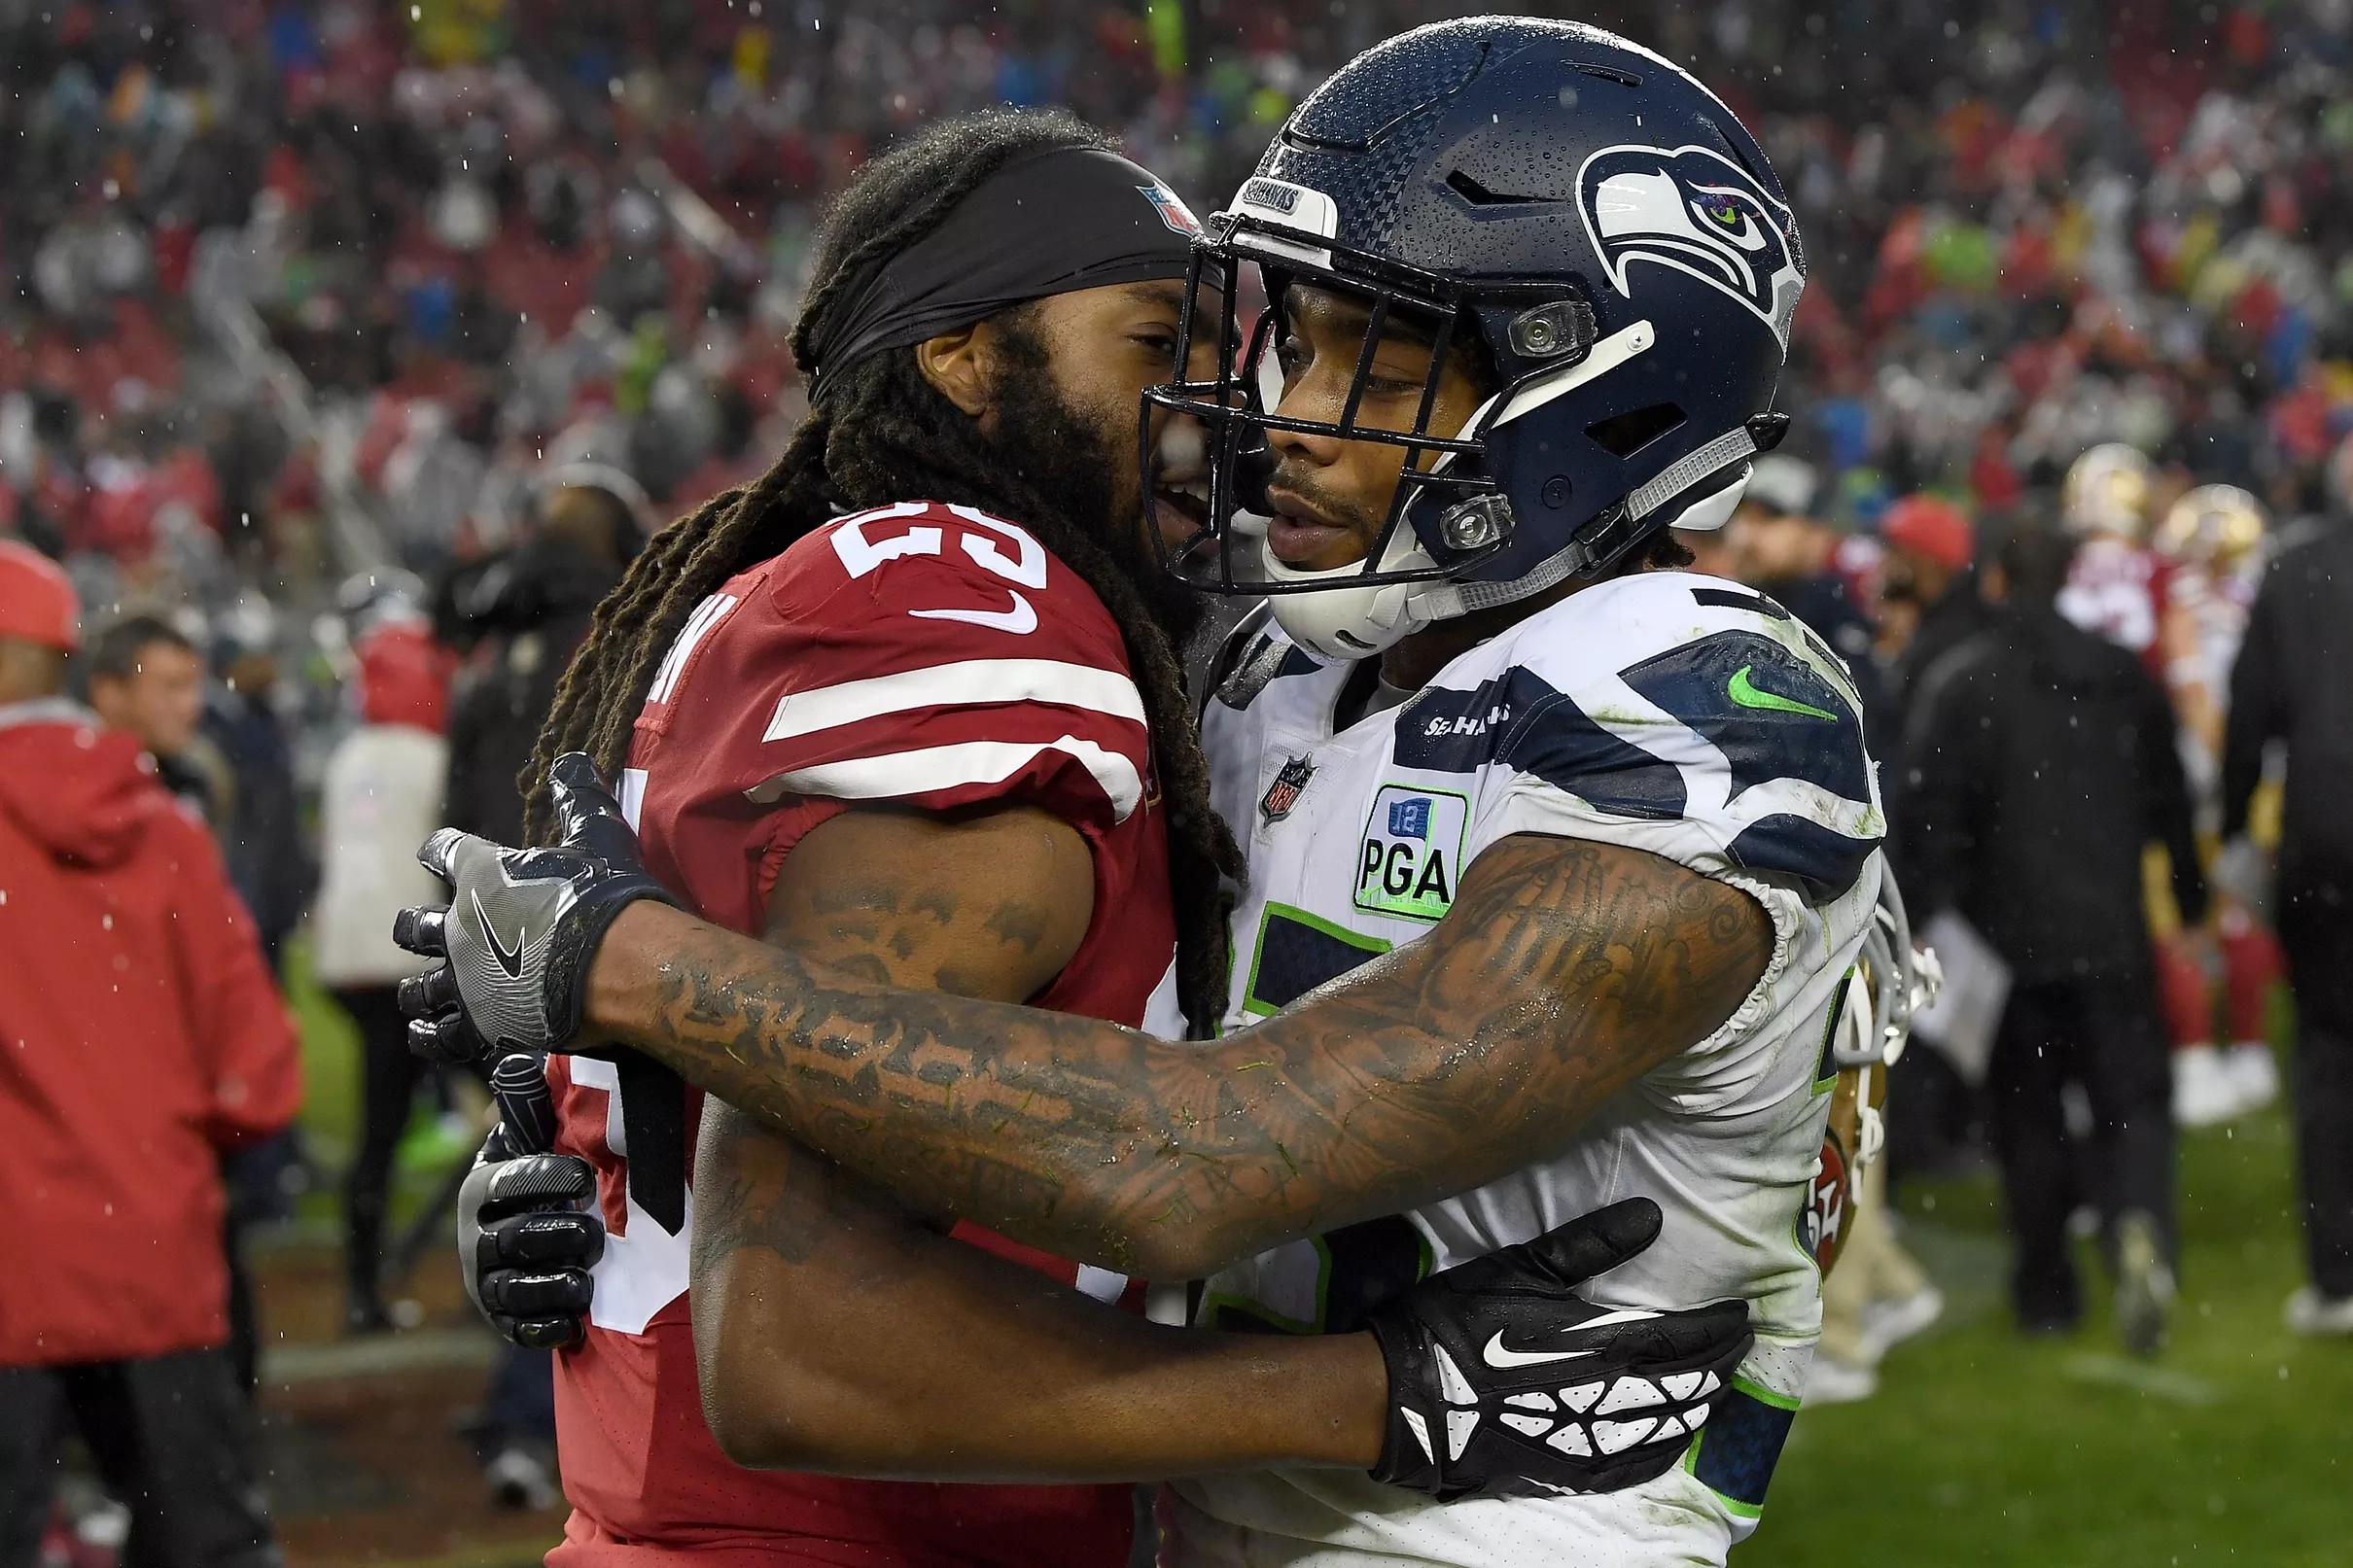 Seahawks-49ers rivalry is back again